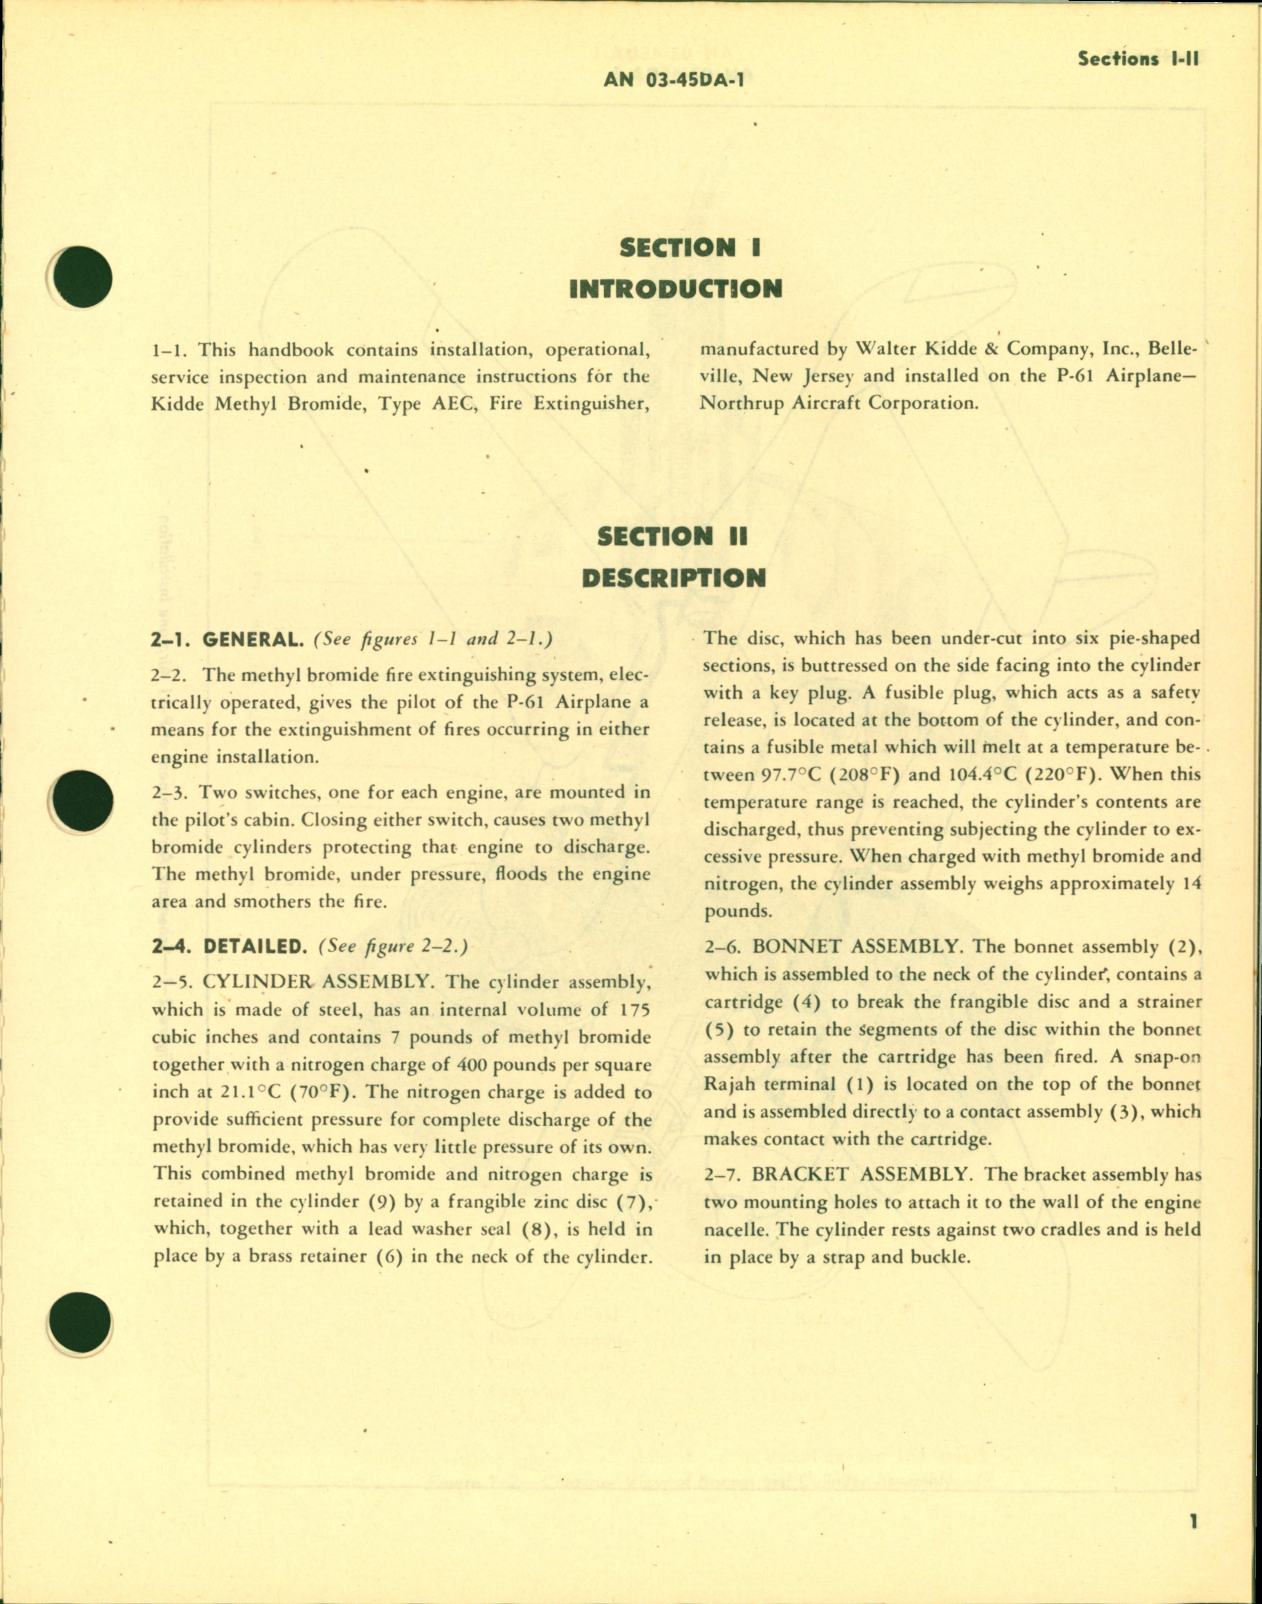 Sample page 5 from AirCorps Library document: Operation and Service Instructions for Type AEC Methyl Bromide Fire Extinguisher